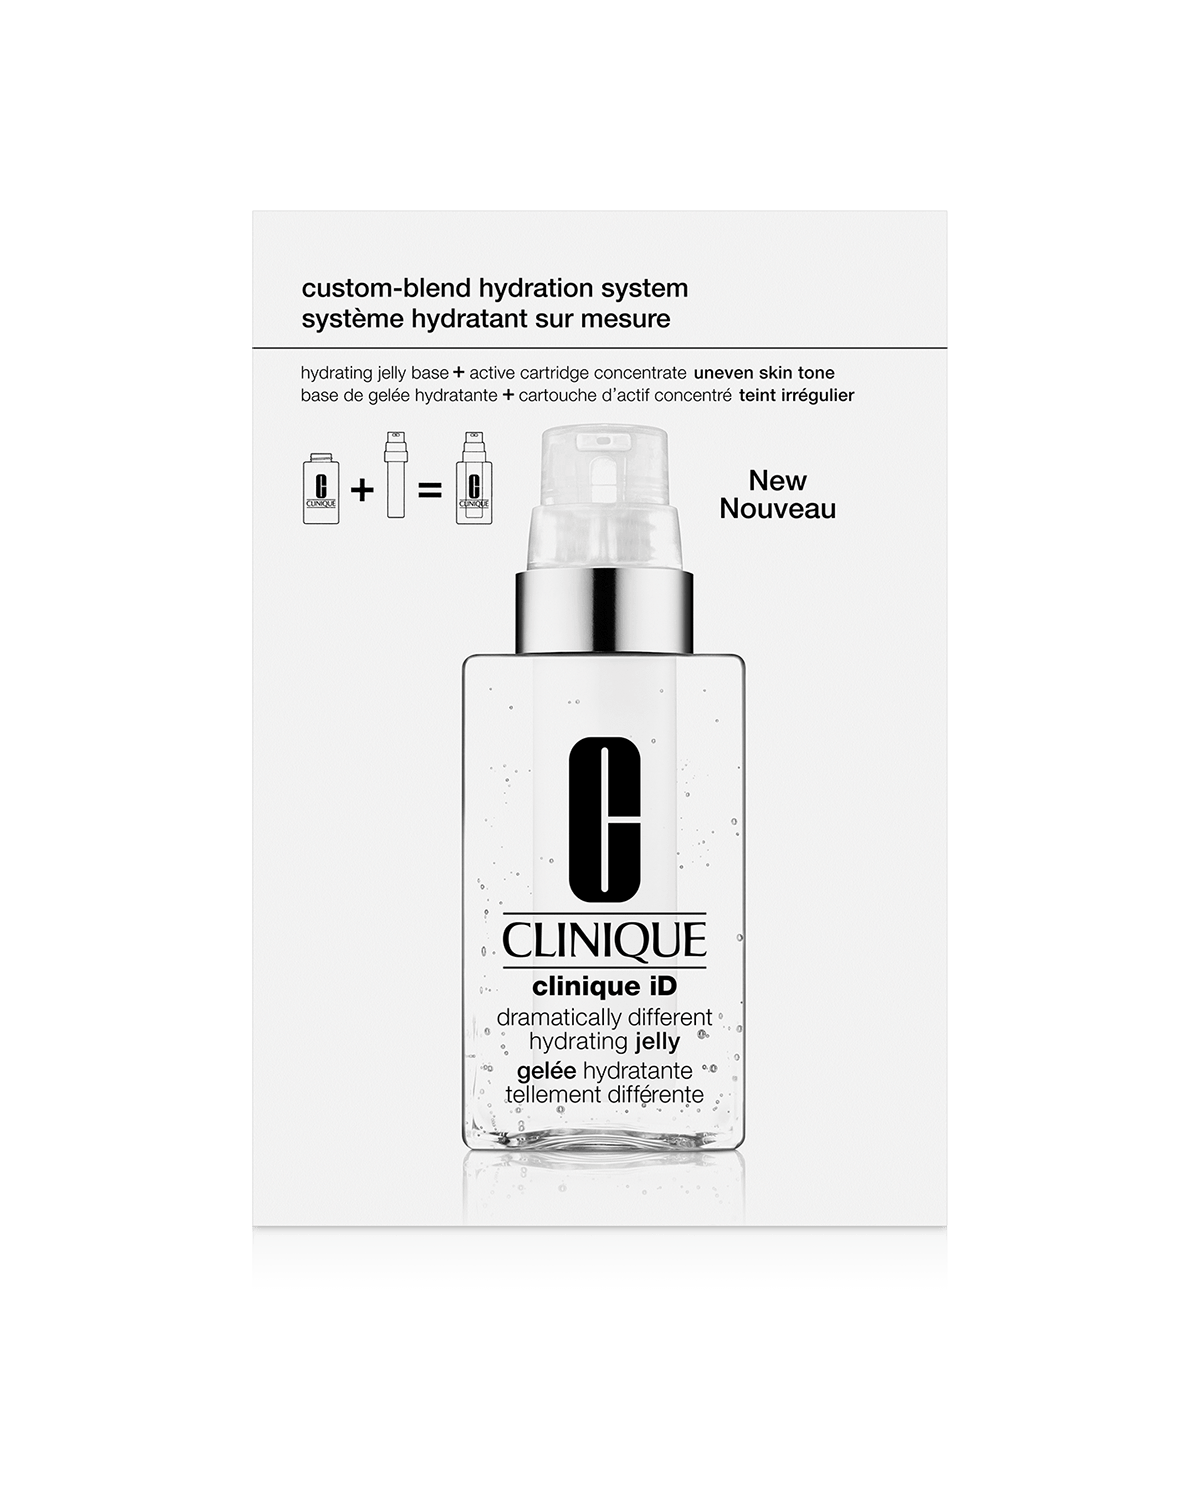 Clinique iD™: Active Cartridge Concentrate for Uneven Skin Tone + Dramatically Different™ Hydrating Jelly Anti-Pollution packette